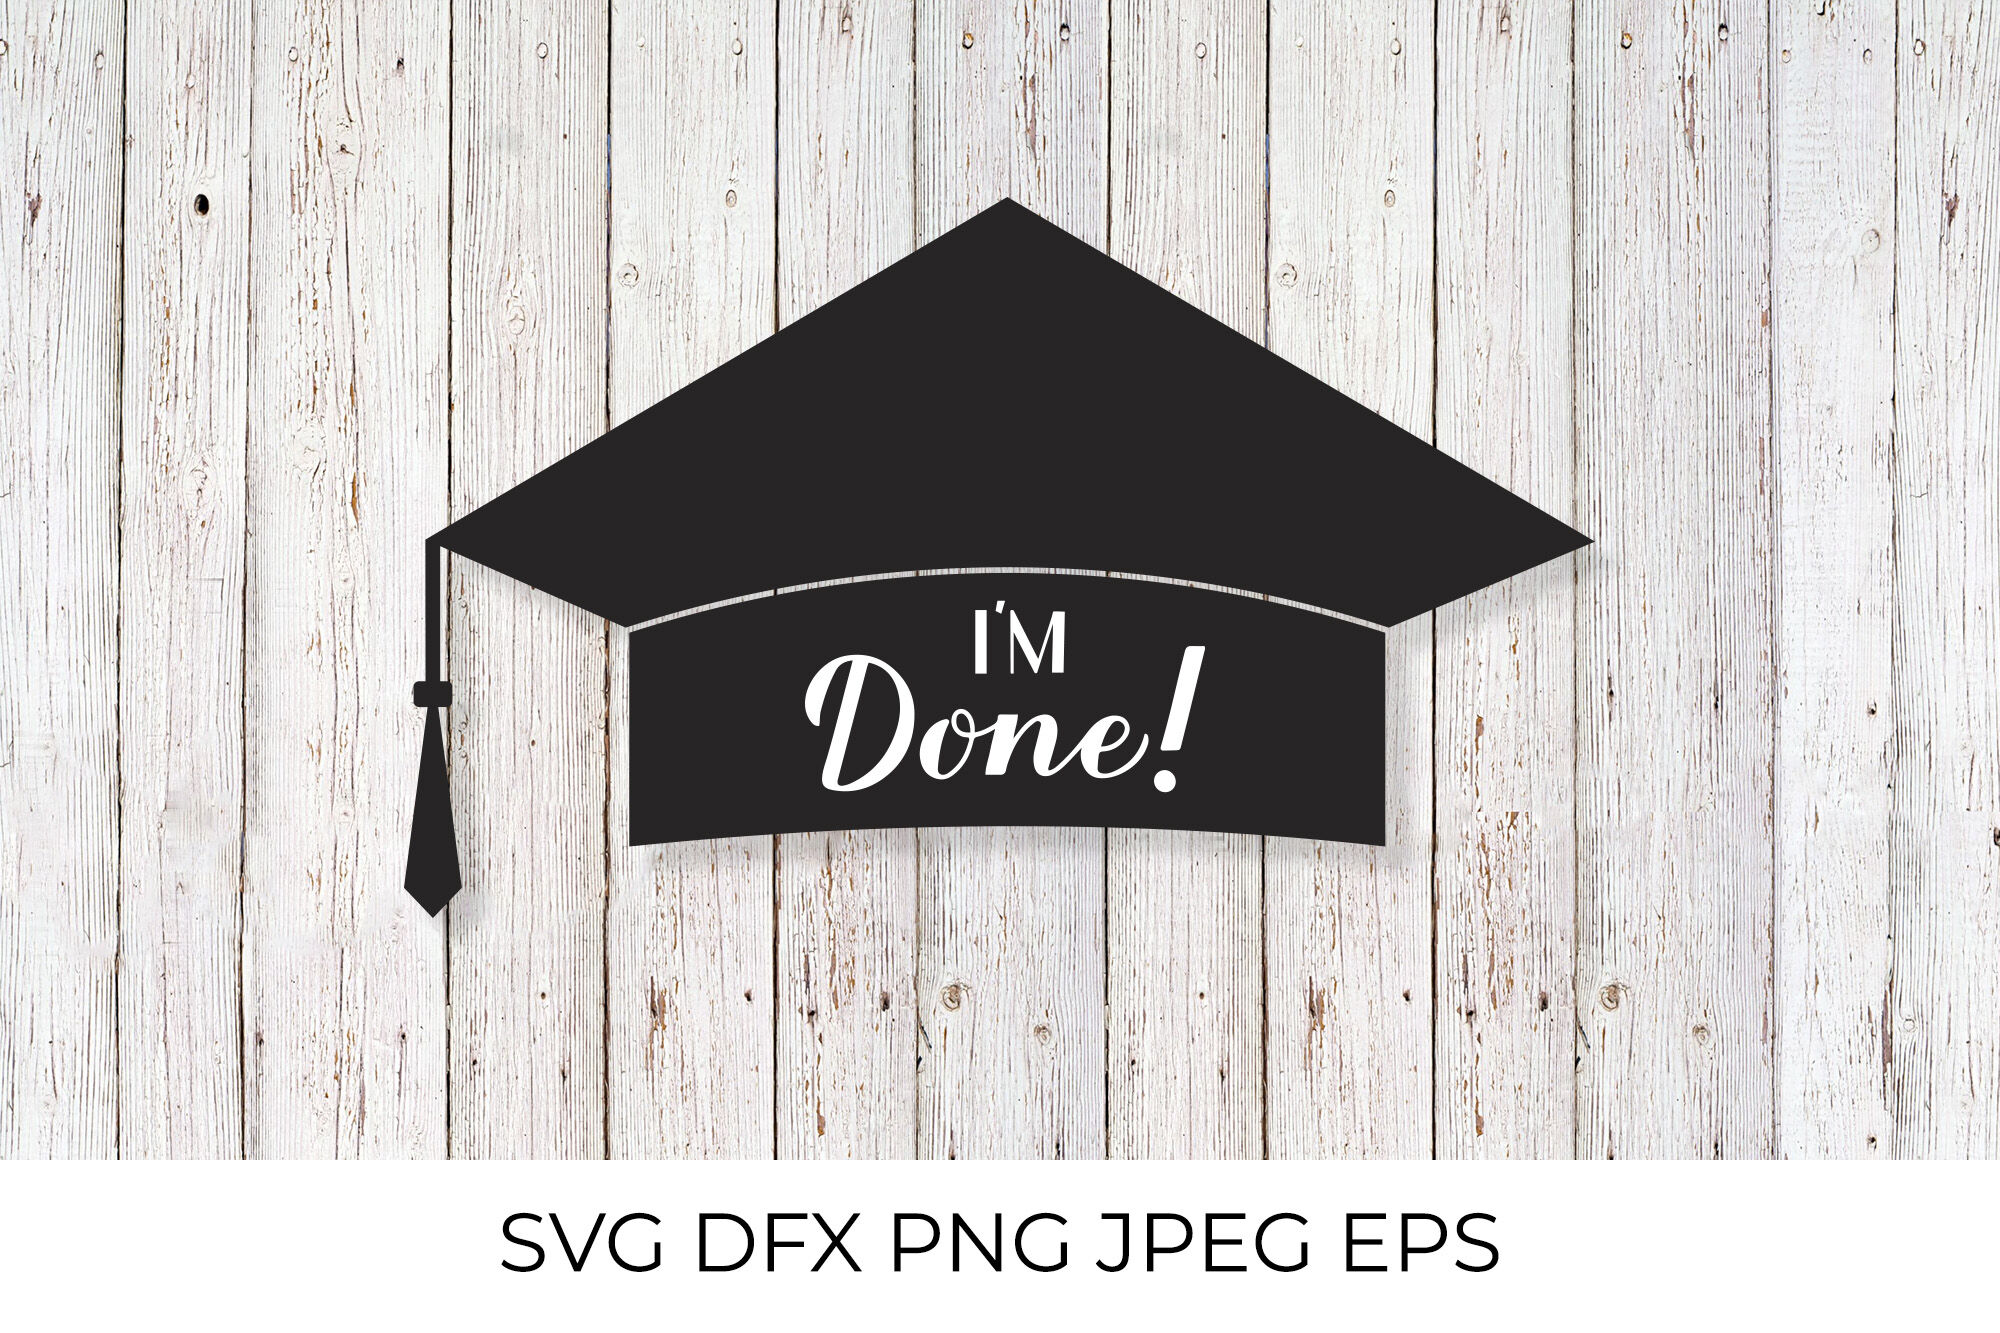 Download Im Done Lettering On Graduation Cap Svg Cut File Dxf Png Jpeg Vec By Labelezoka Thehungryjpeg Com